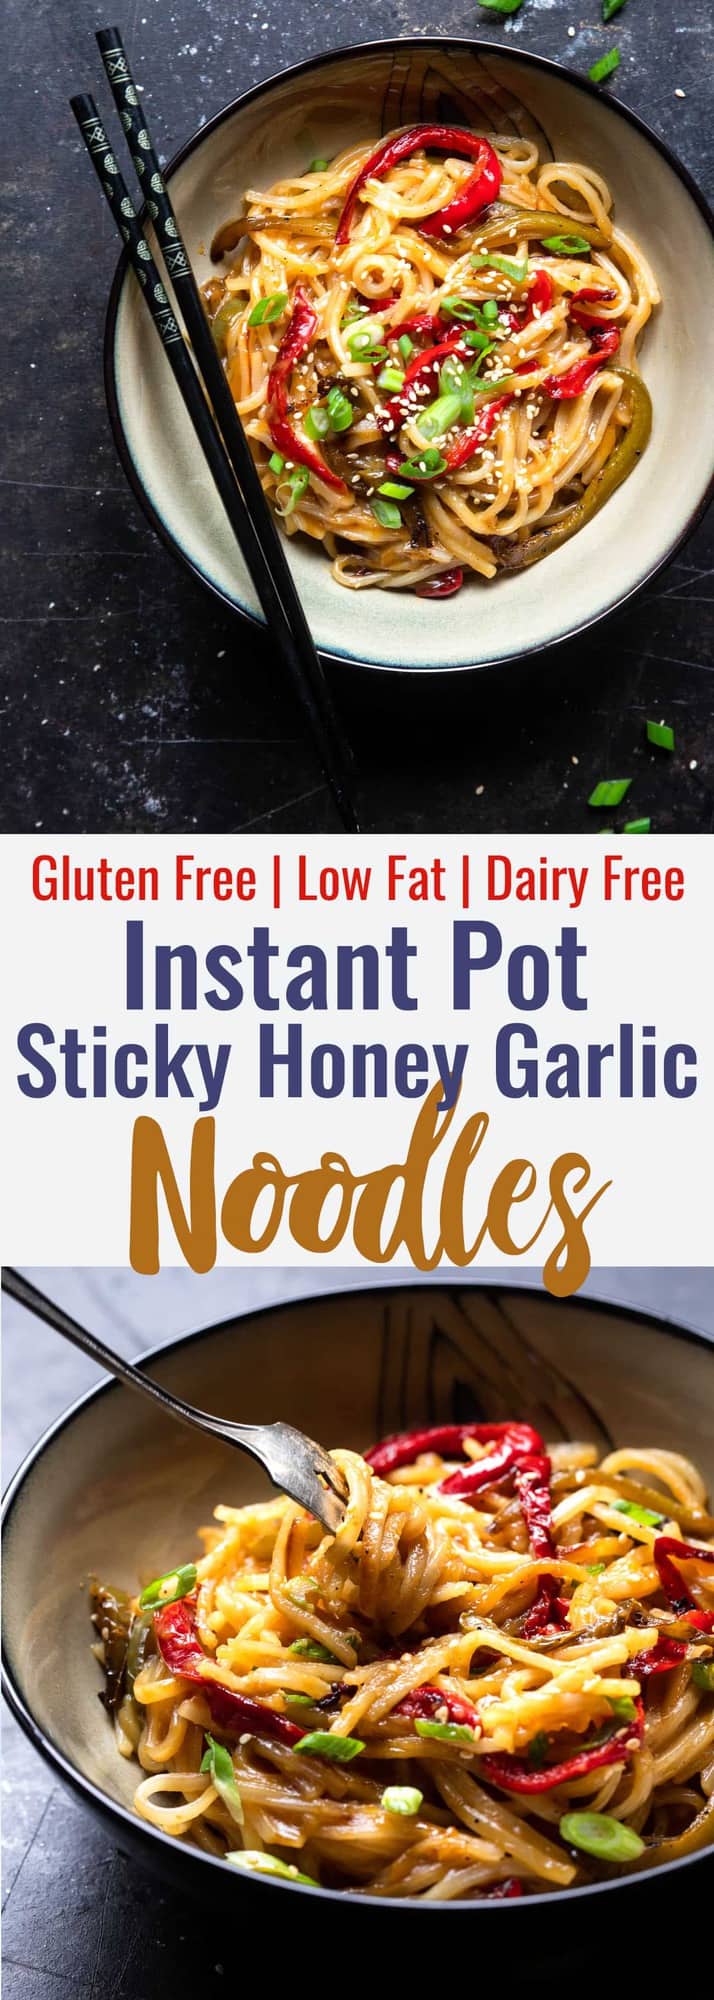 Honey Garlic Instant Pot Noodles - These Asian Instant Pot noodles are sticky, sweet and SO addicting! An EASY, gluten free dinner that even picky eaters will request! | #Foodfaithfitness | #glutenfree #InstantPot #healthy #dairyfree #vegetarian